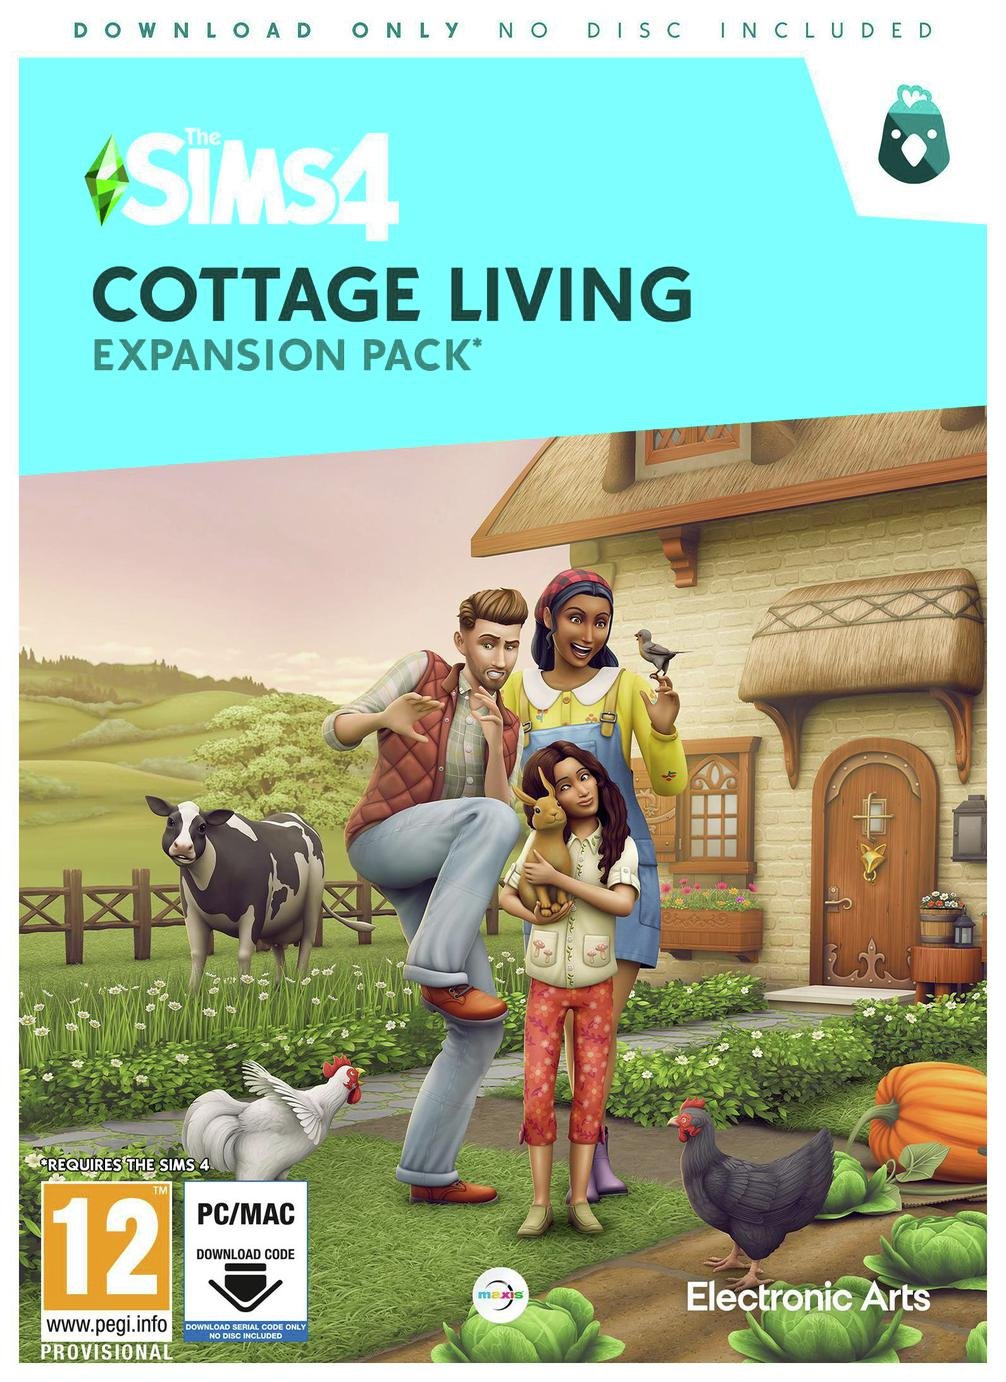 The Sims 4 Cottage Living Expansion Pack PC Game